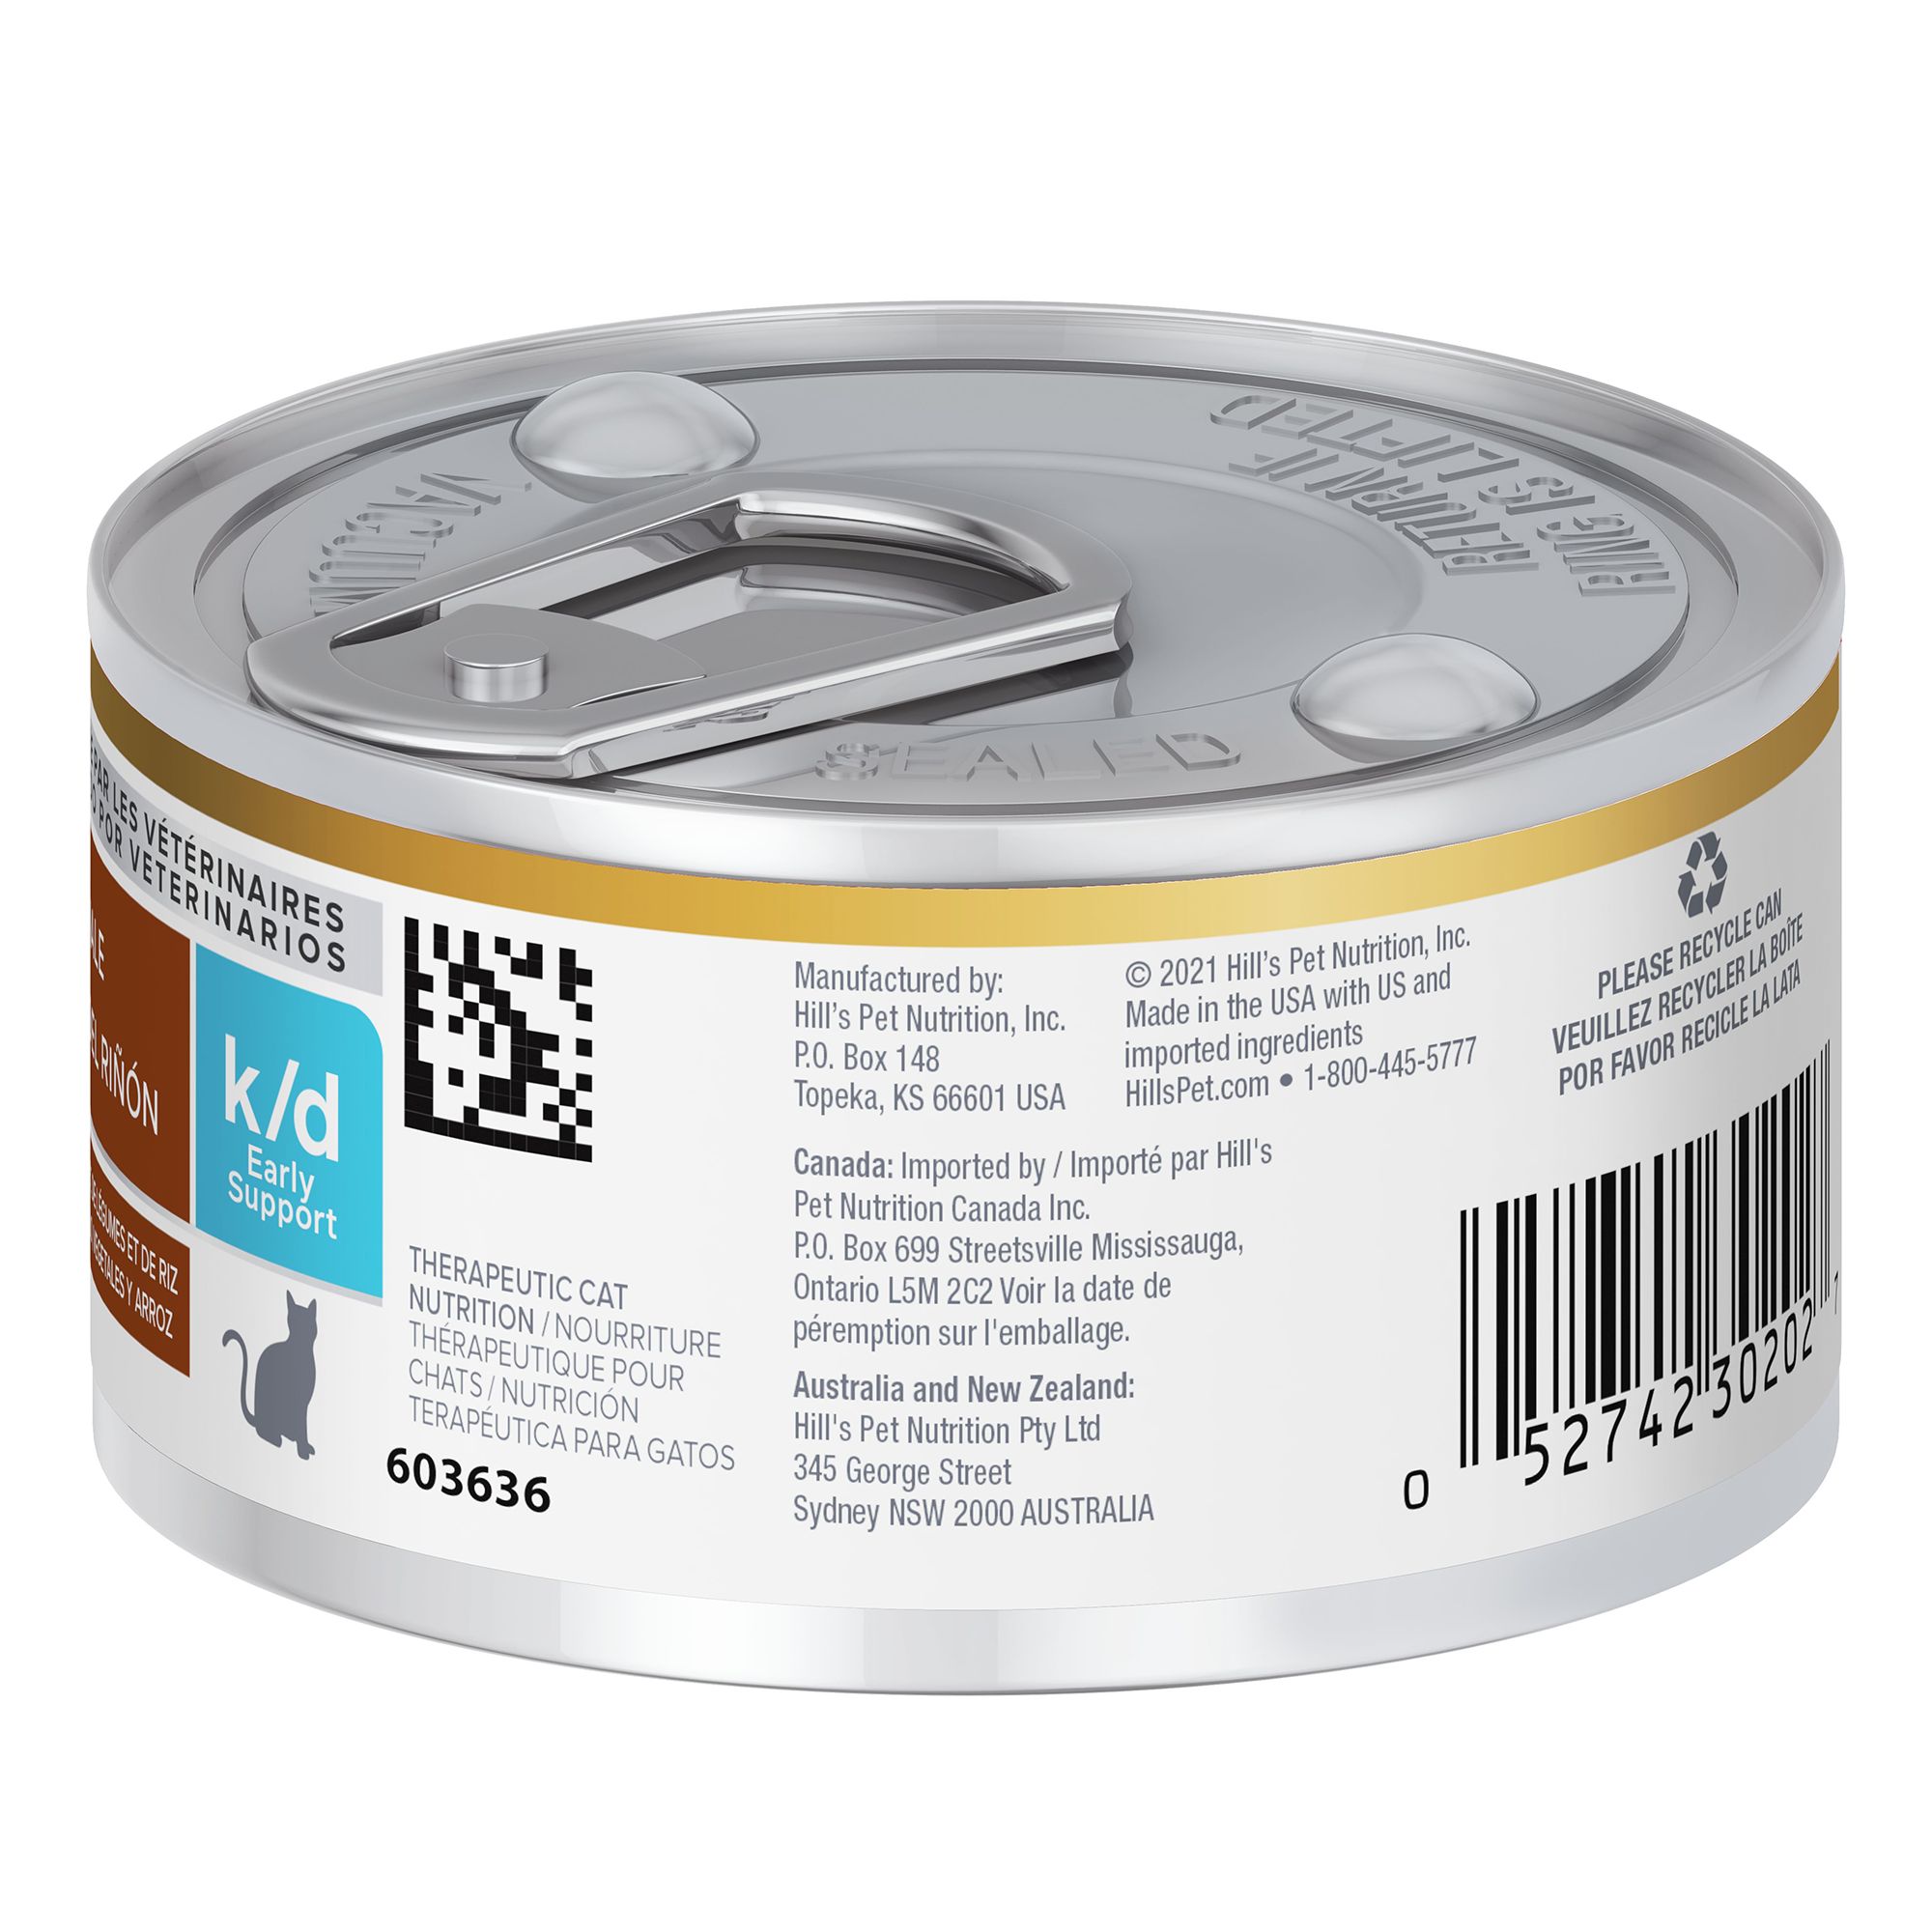 hills kd canned cat food